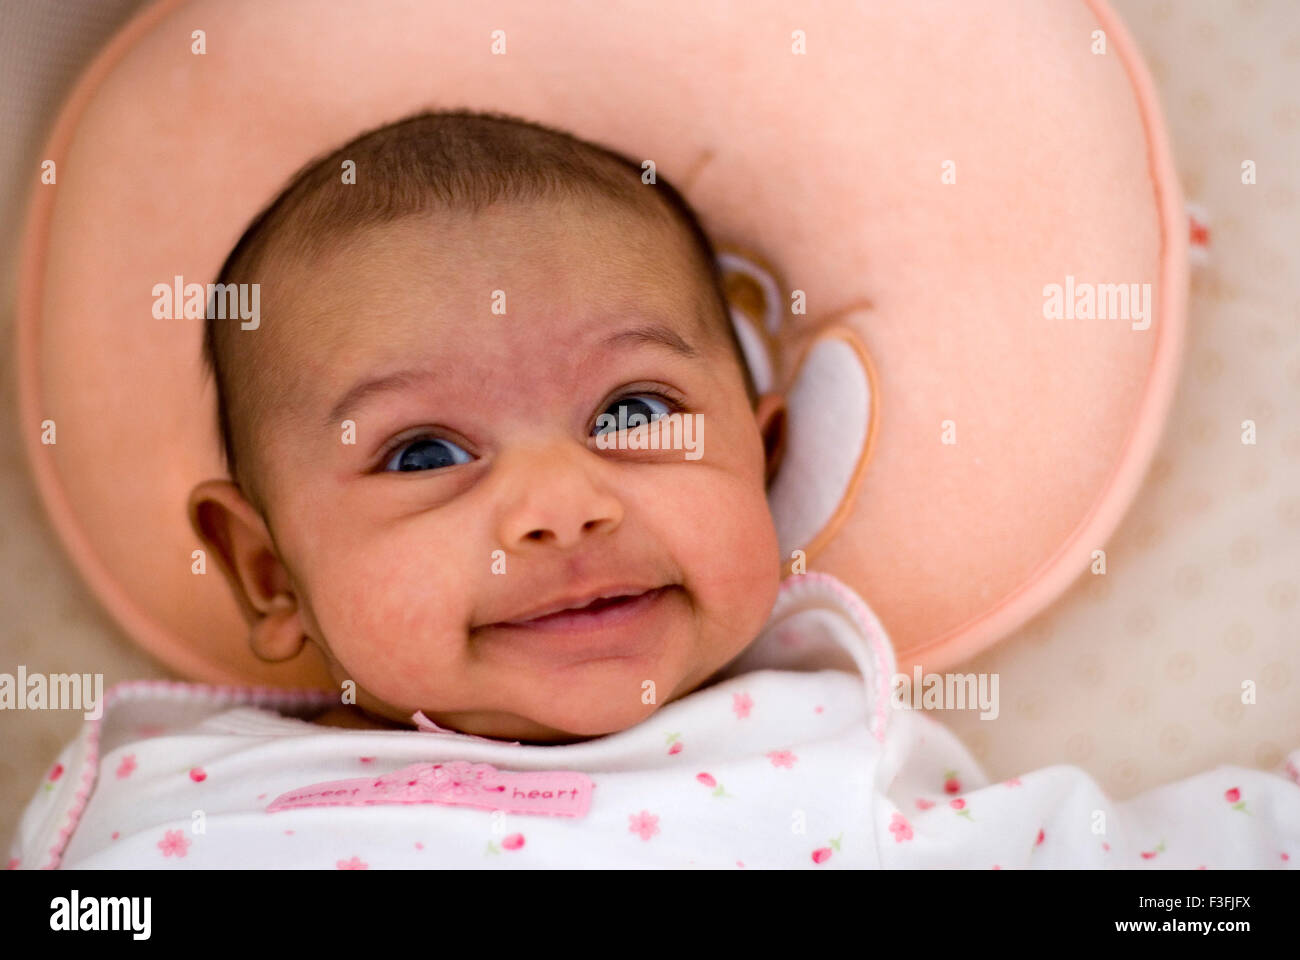 Baby Girl Namya ; two months old ; face ; expressions ; emotions and moods MR Stock Photo